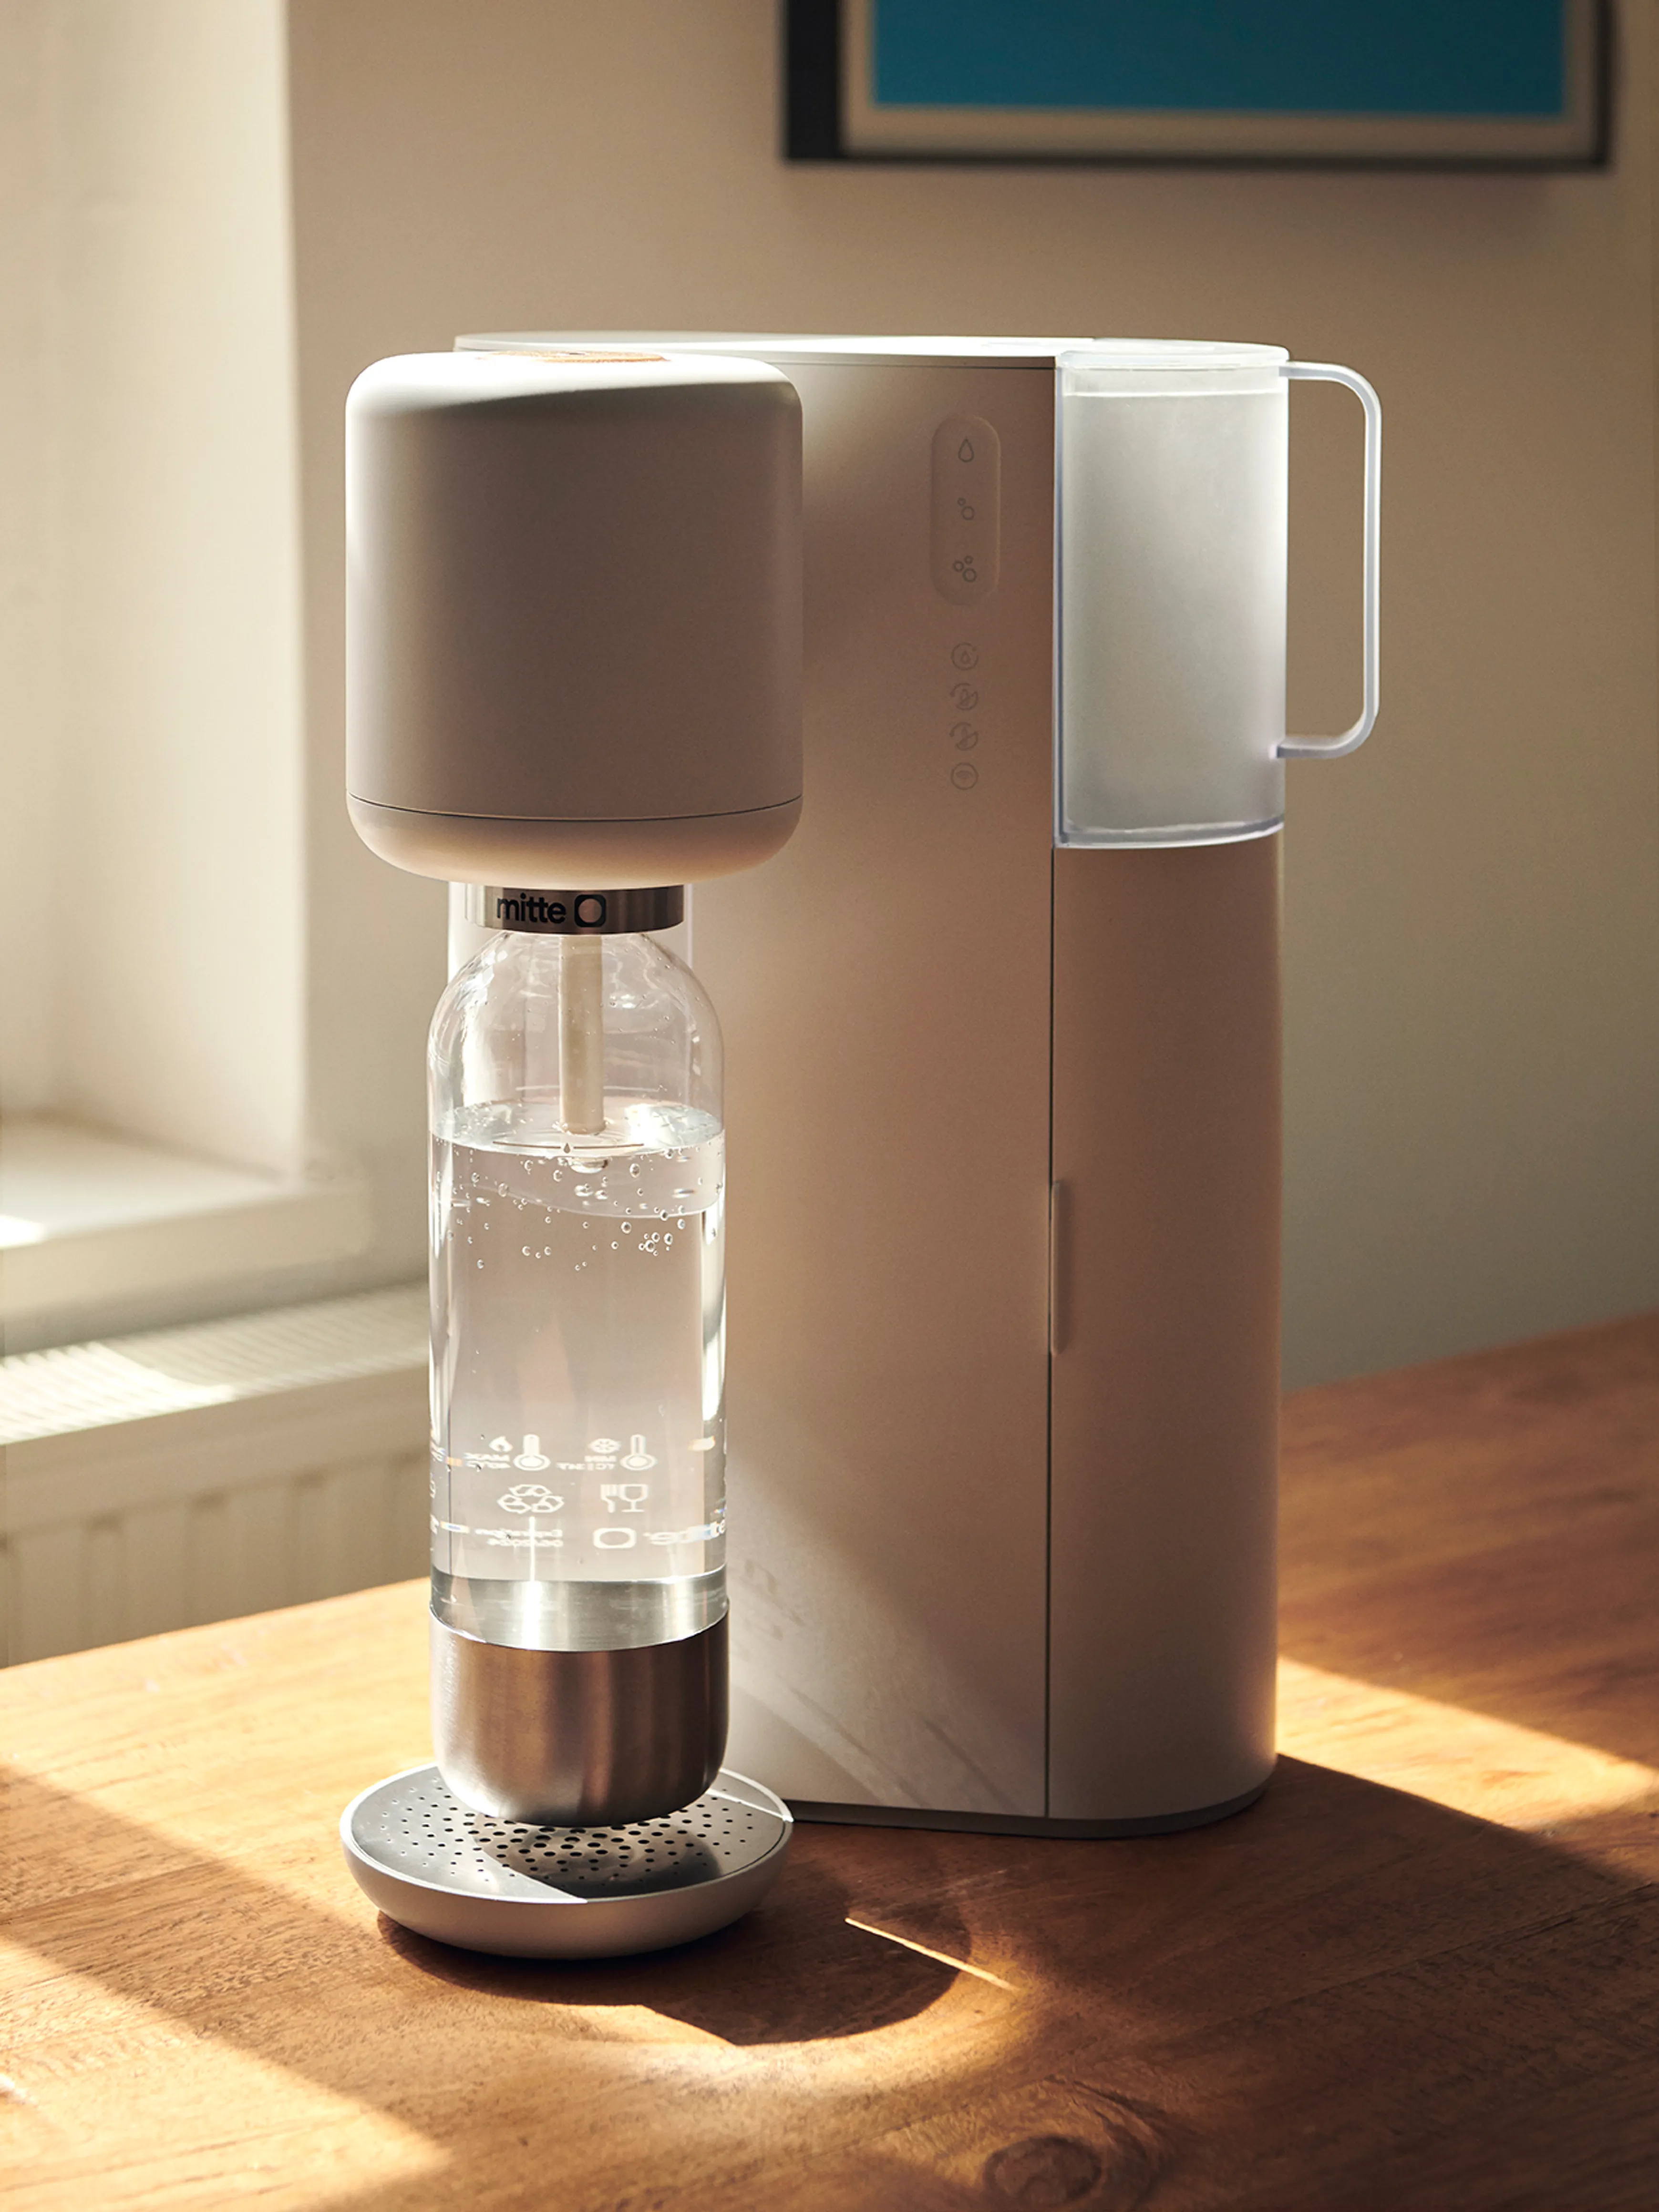 Mitte water purifier on a wooden tabletop